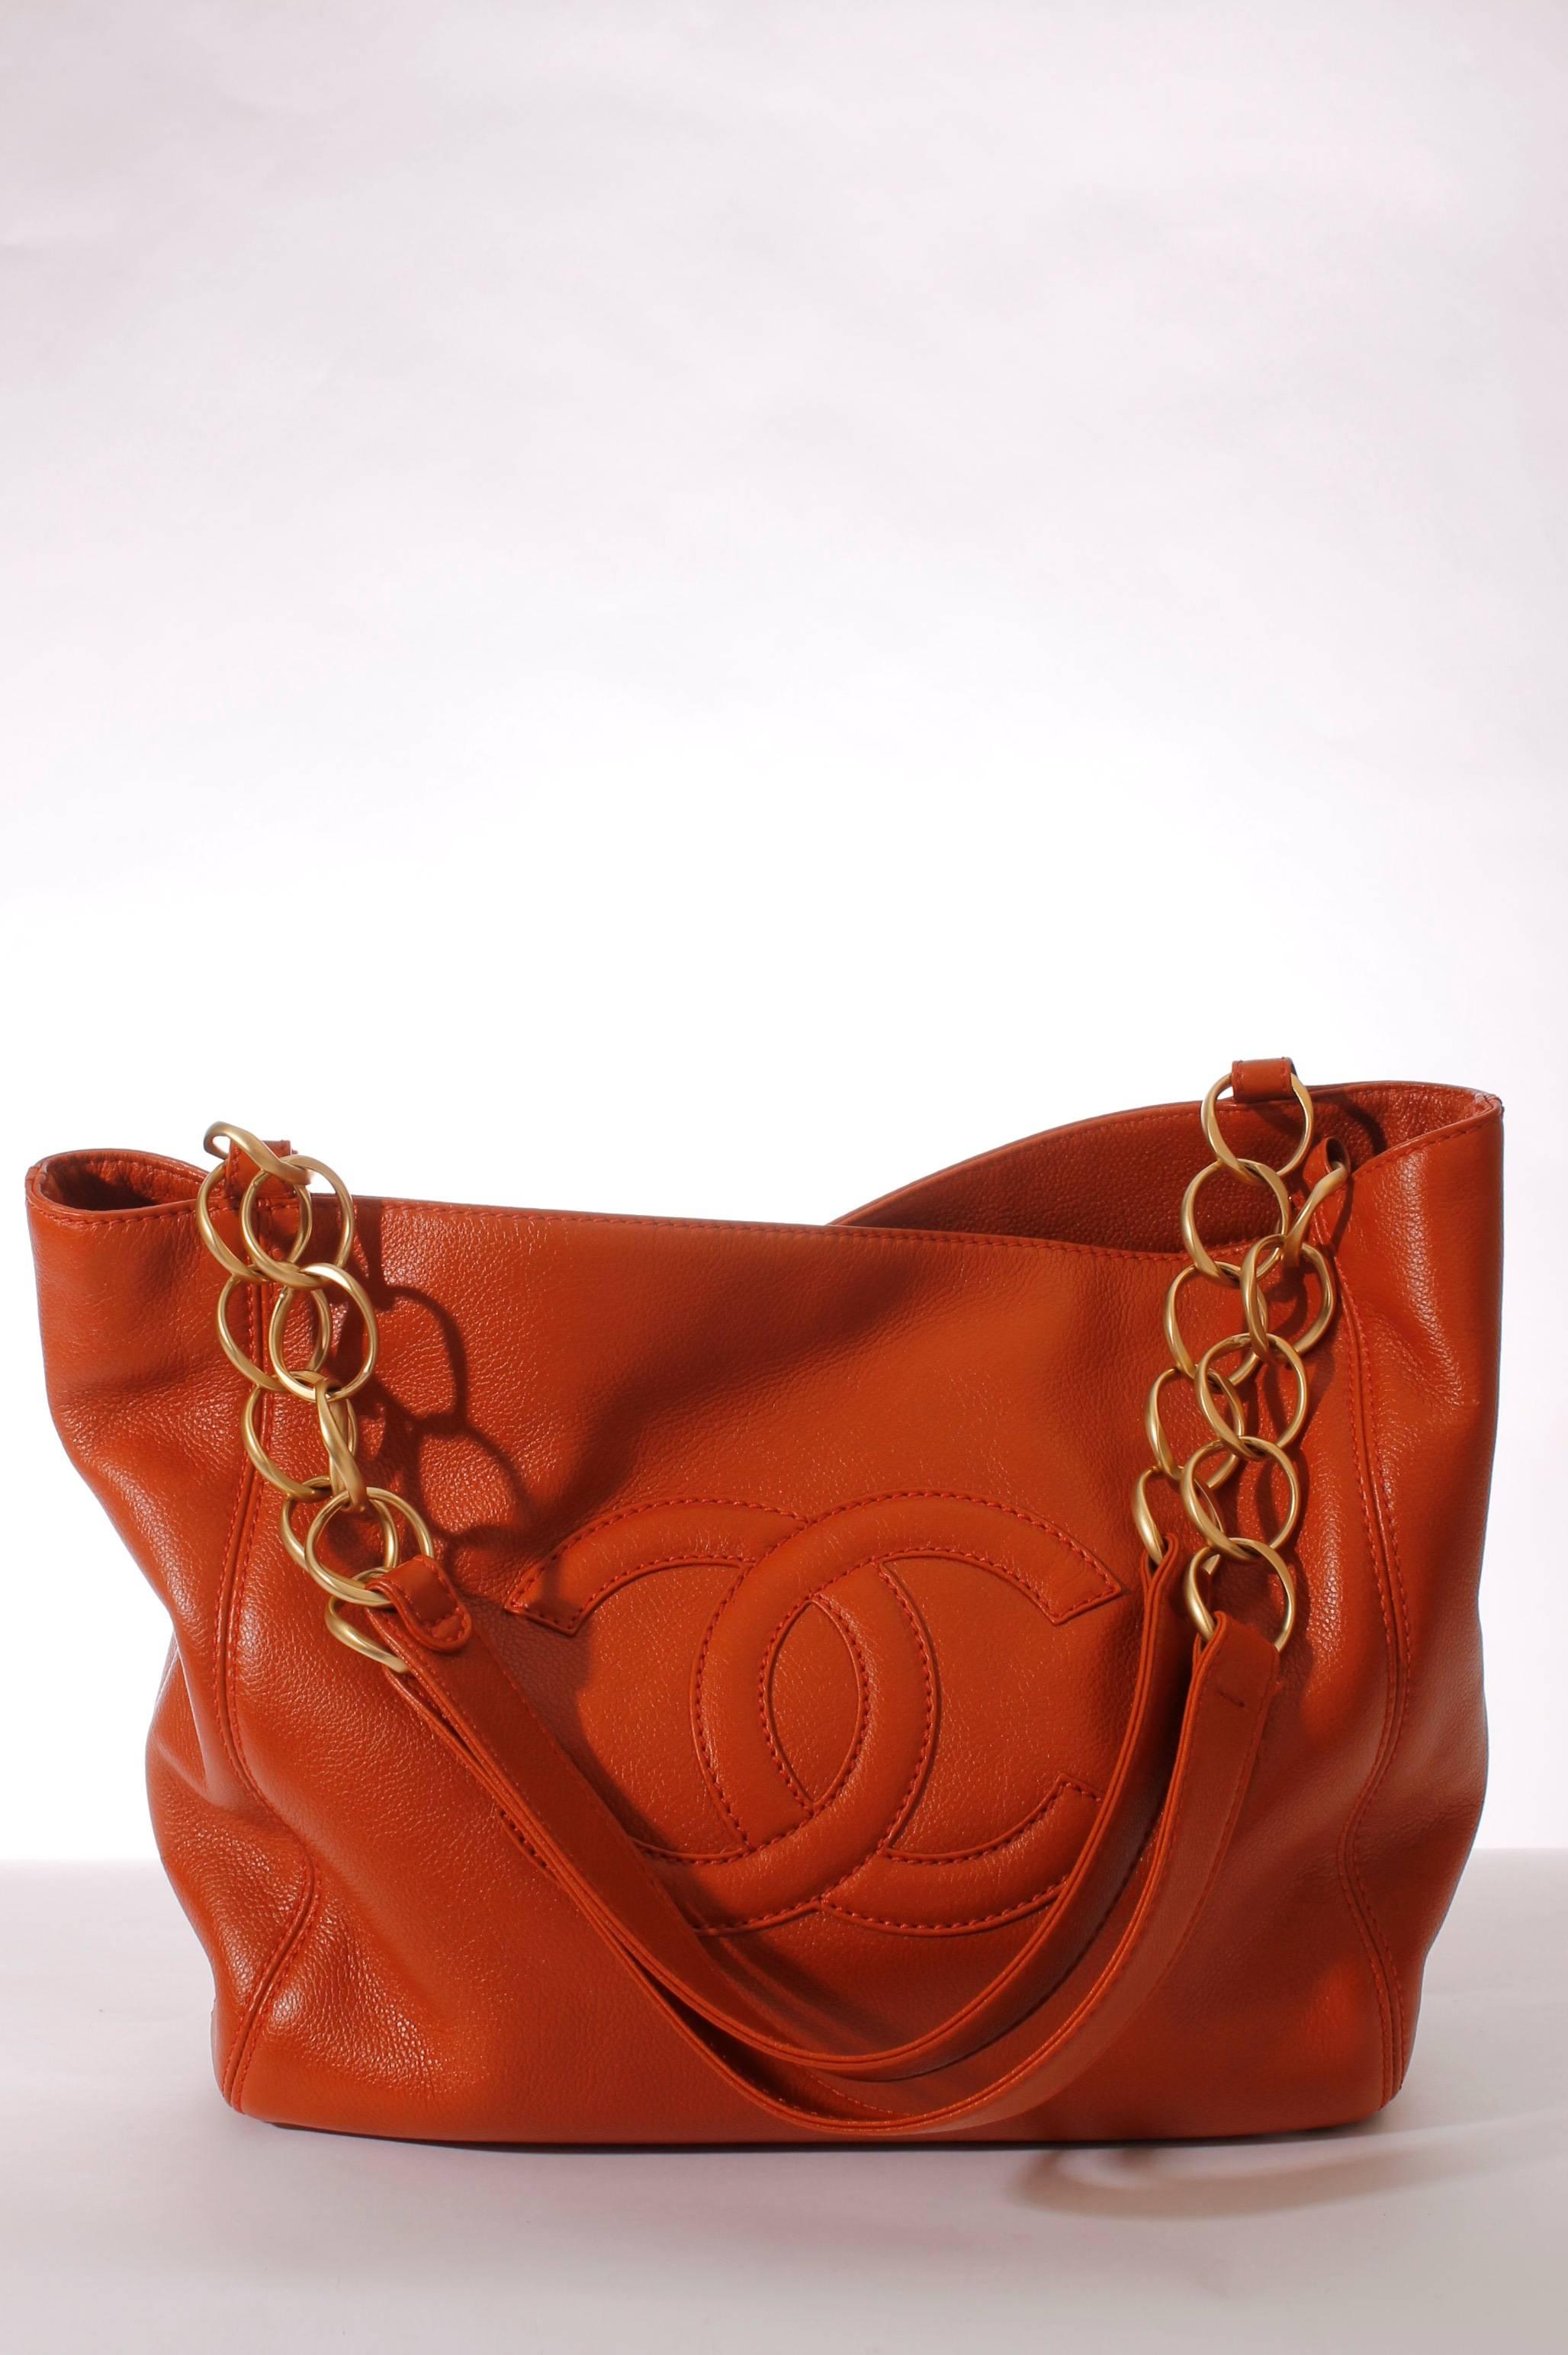 Chanel Shopper Tote Bag - orange leather In Excellent Condition For Sale In Baarn, NL